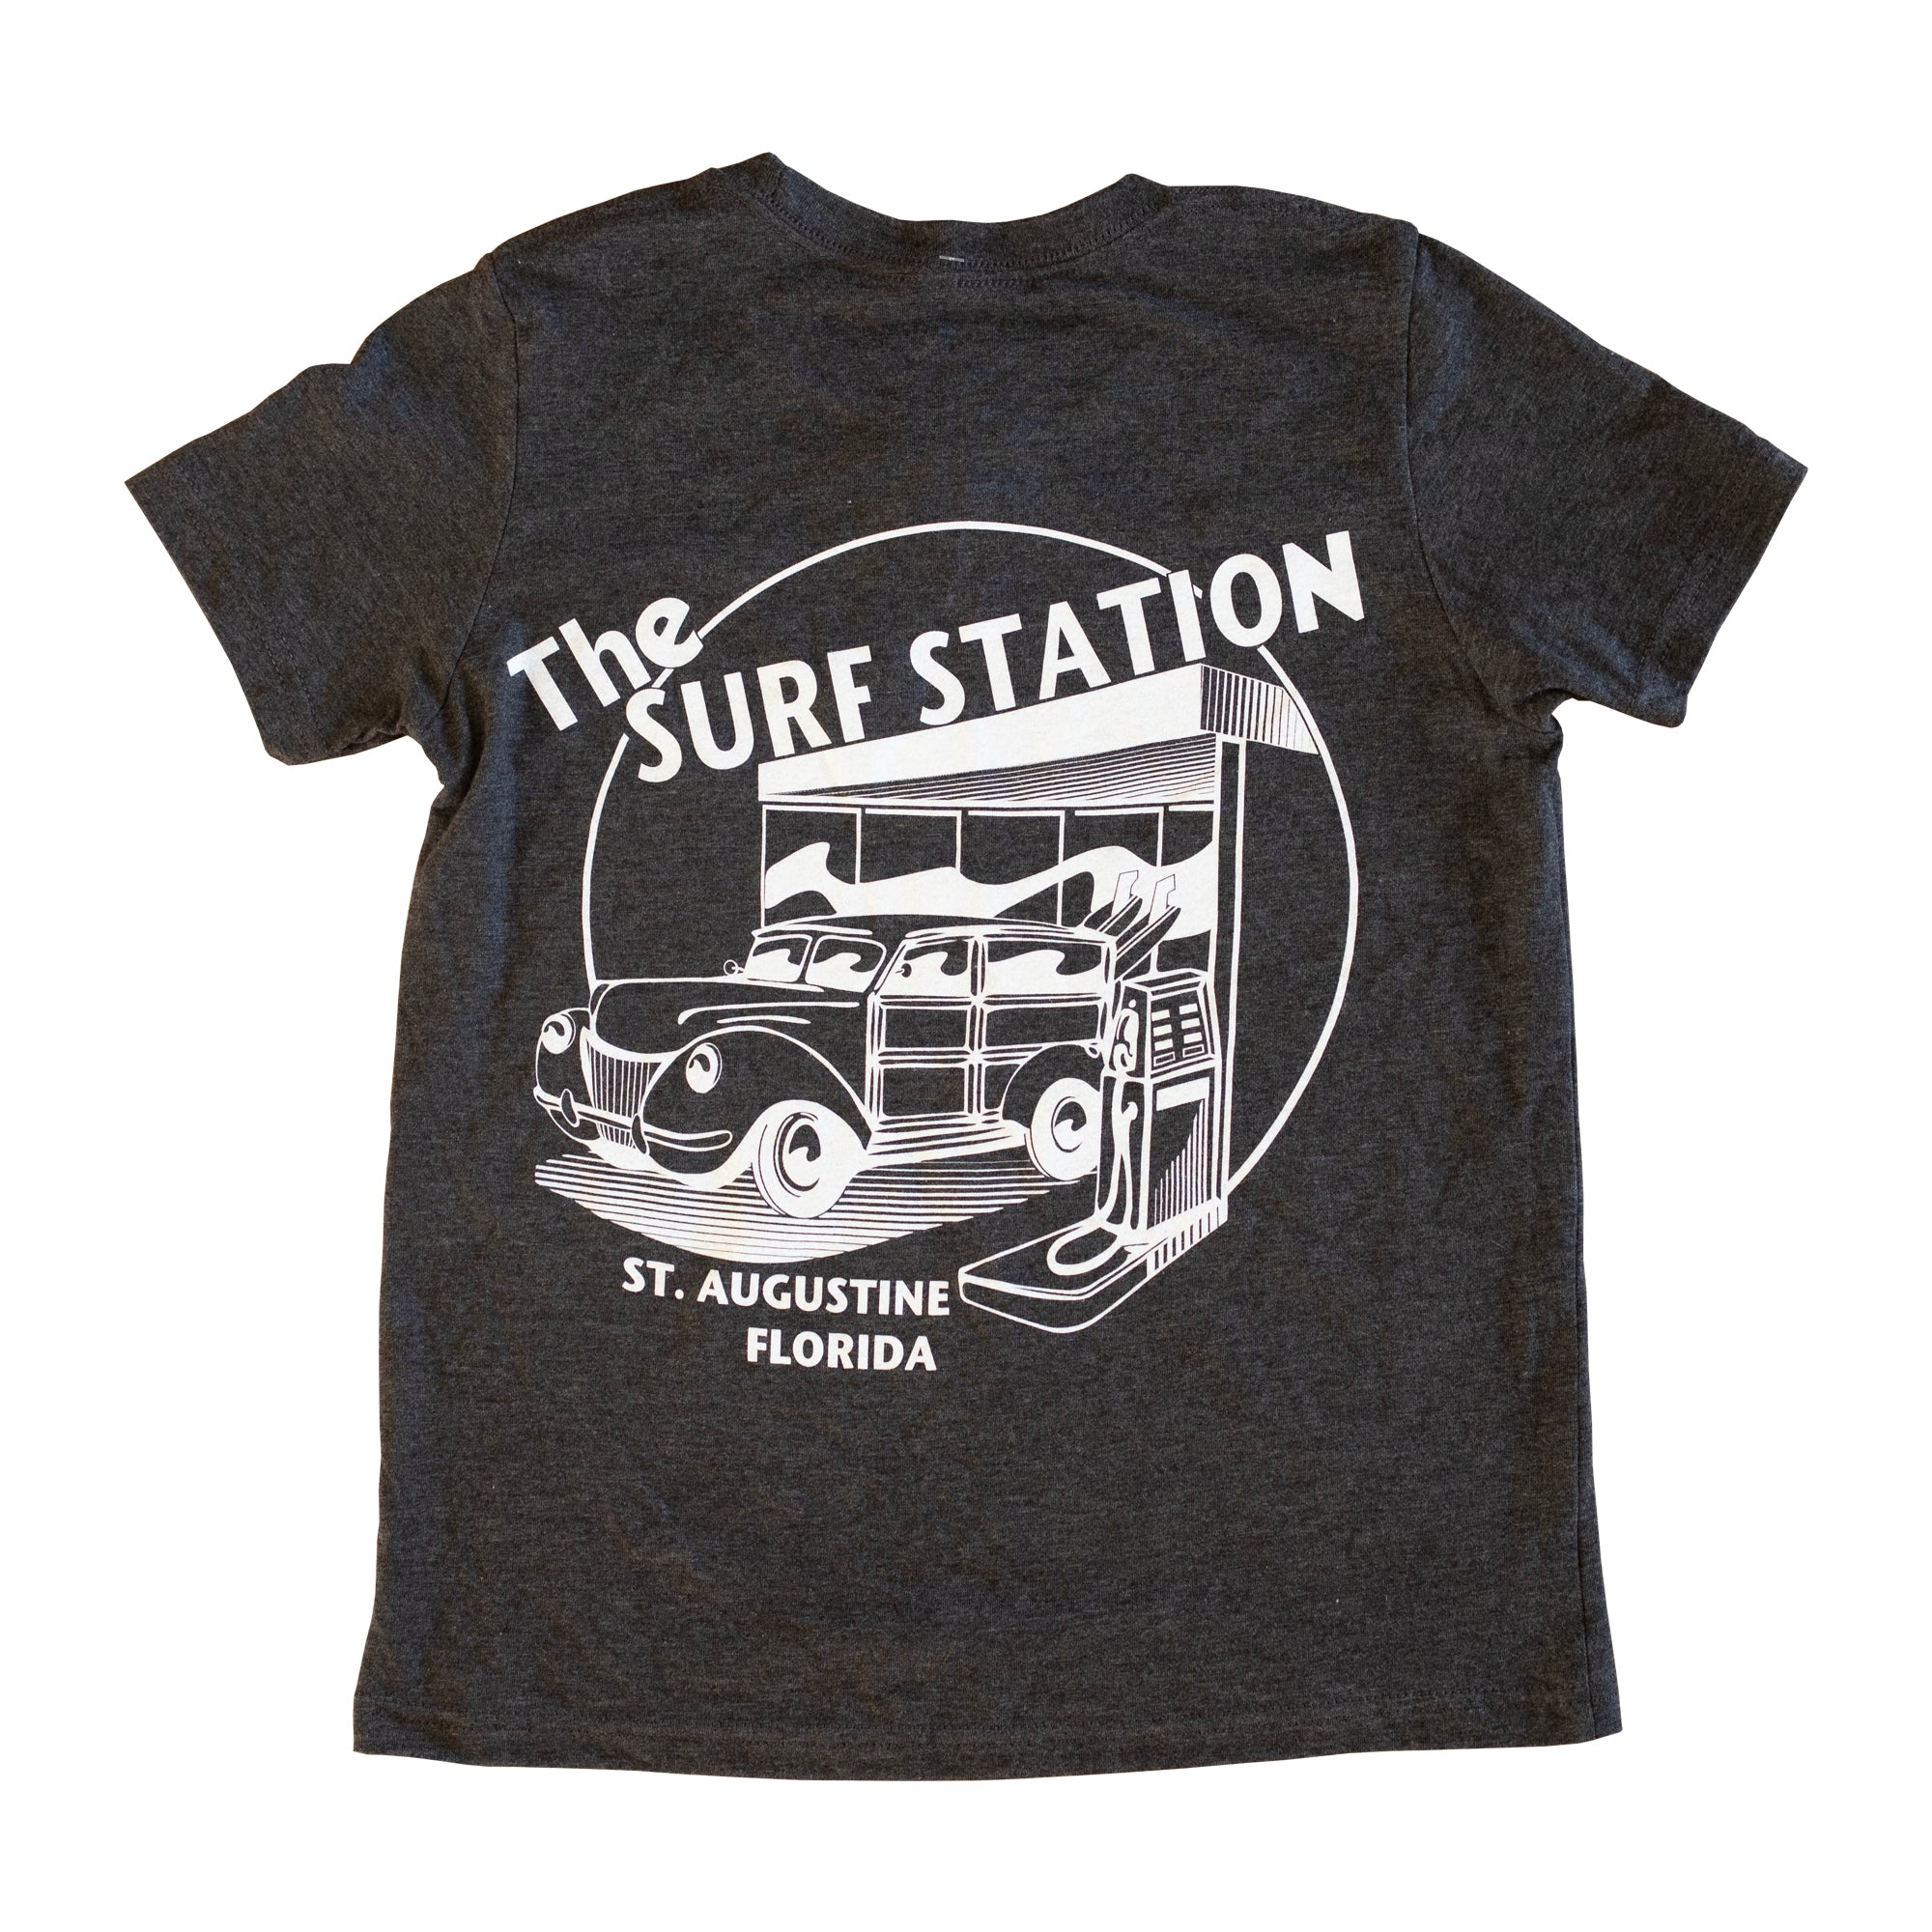 Surf Station Circle Woody Youth S/S T-Shirt